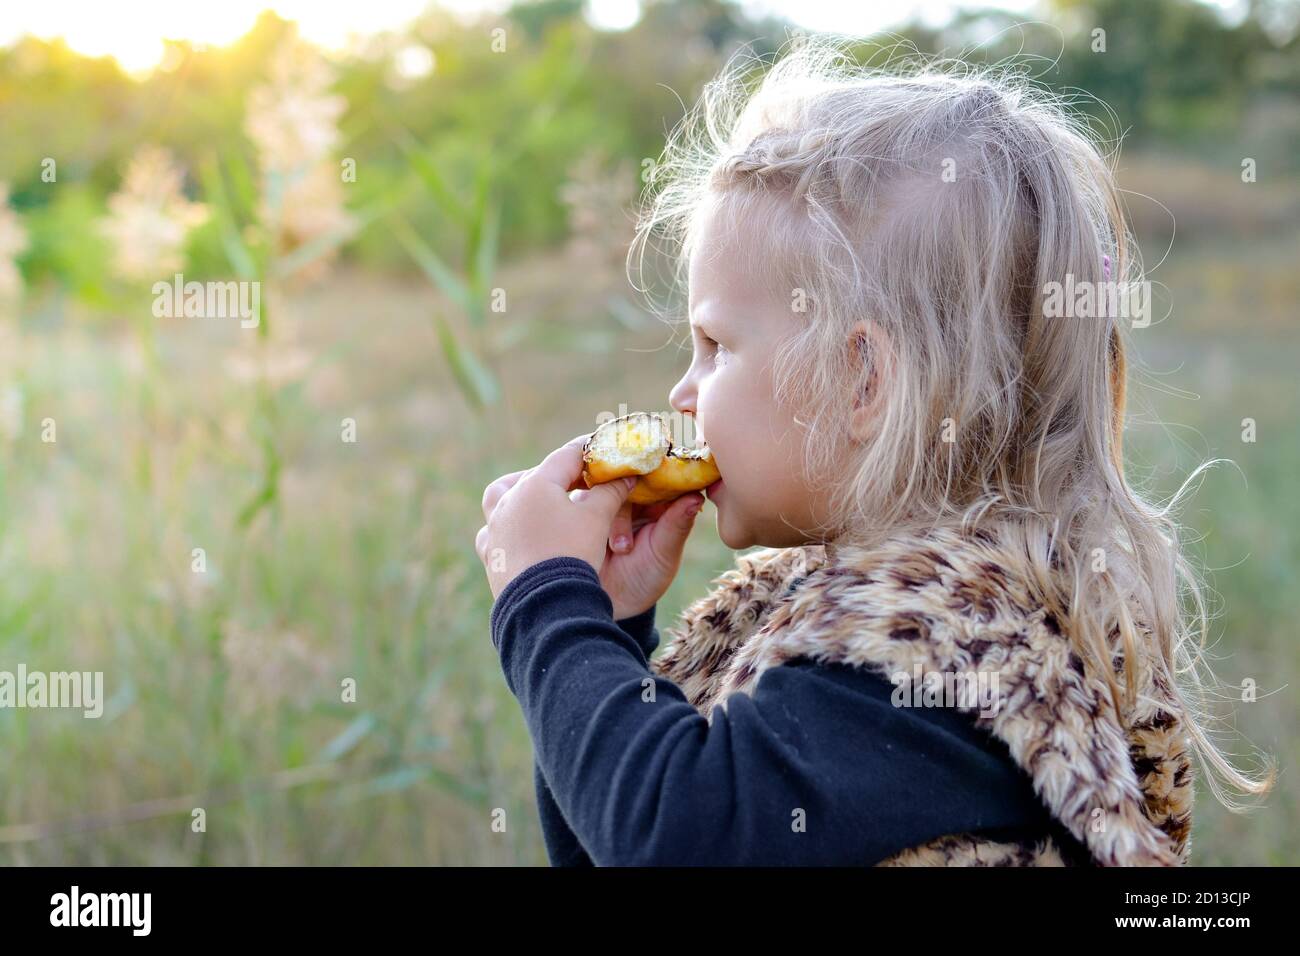 Girl outdoors in nature. Beautiful girl 3 years old. Autumn photo. Children's emotions. Girl eating donut Stock Photo